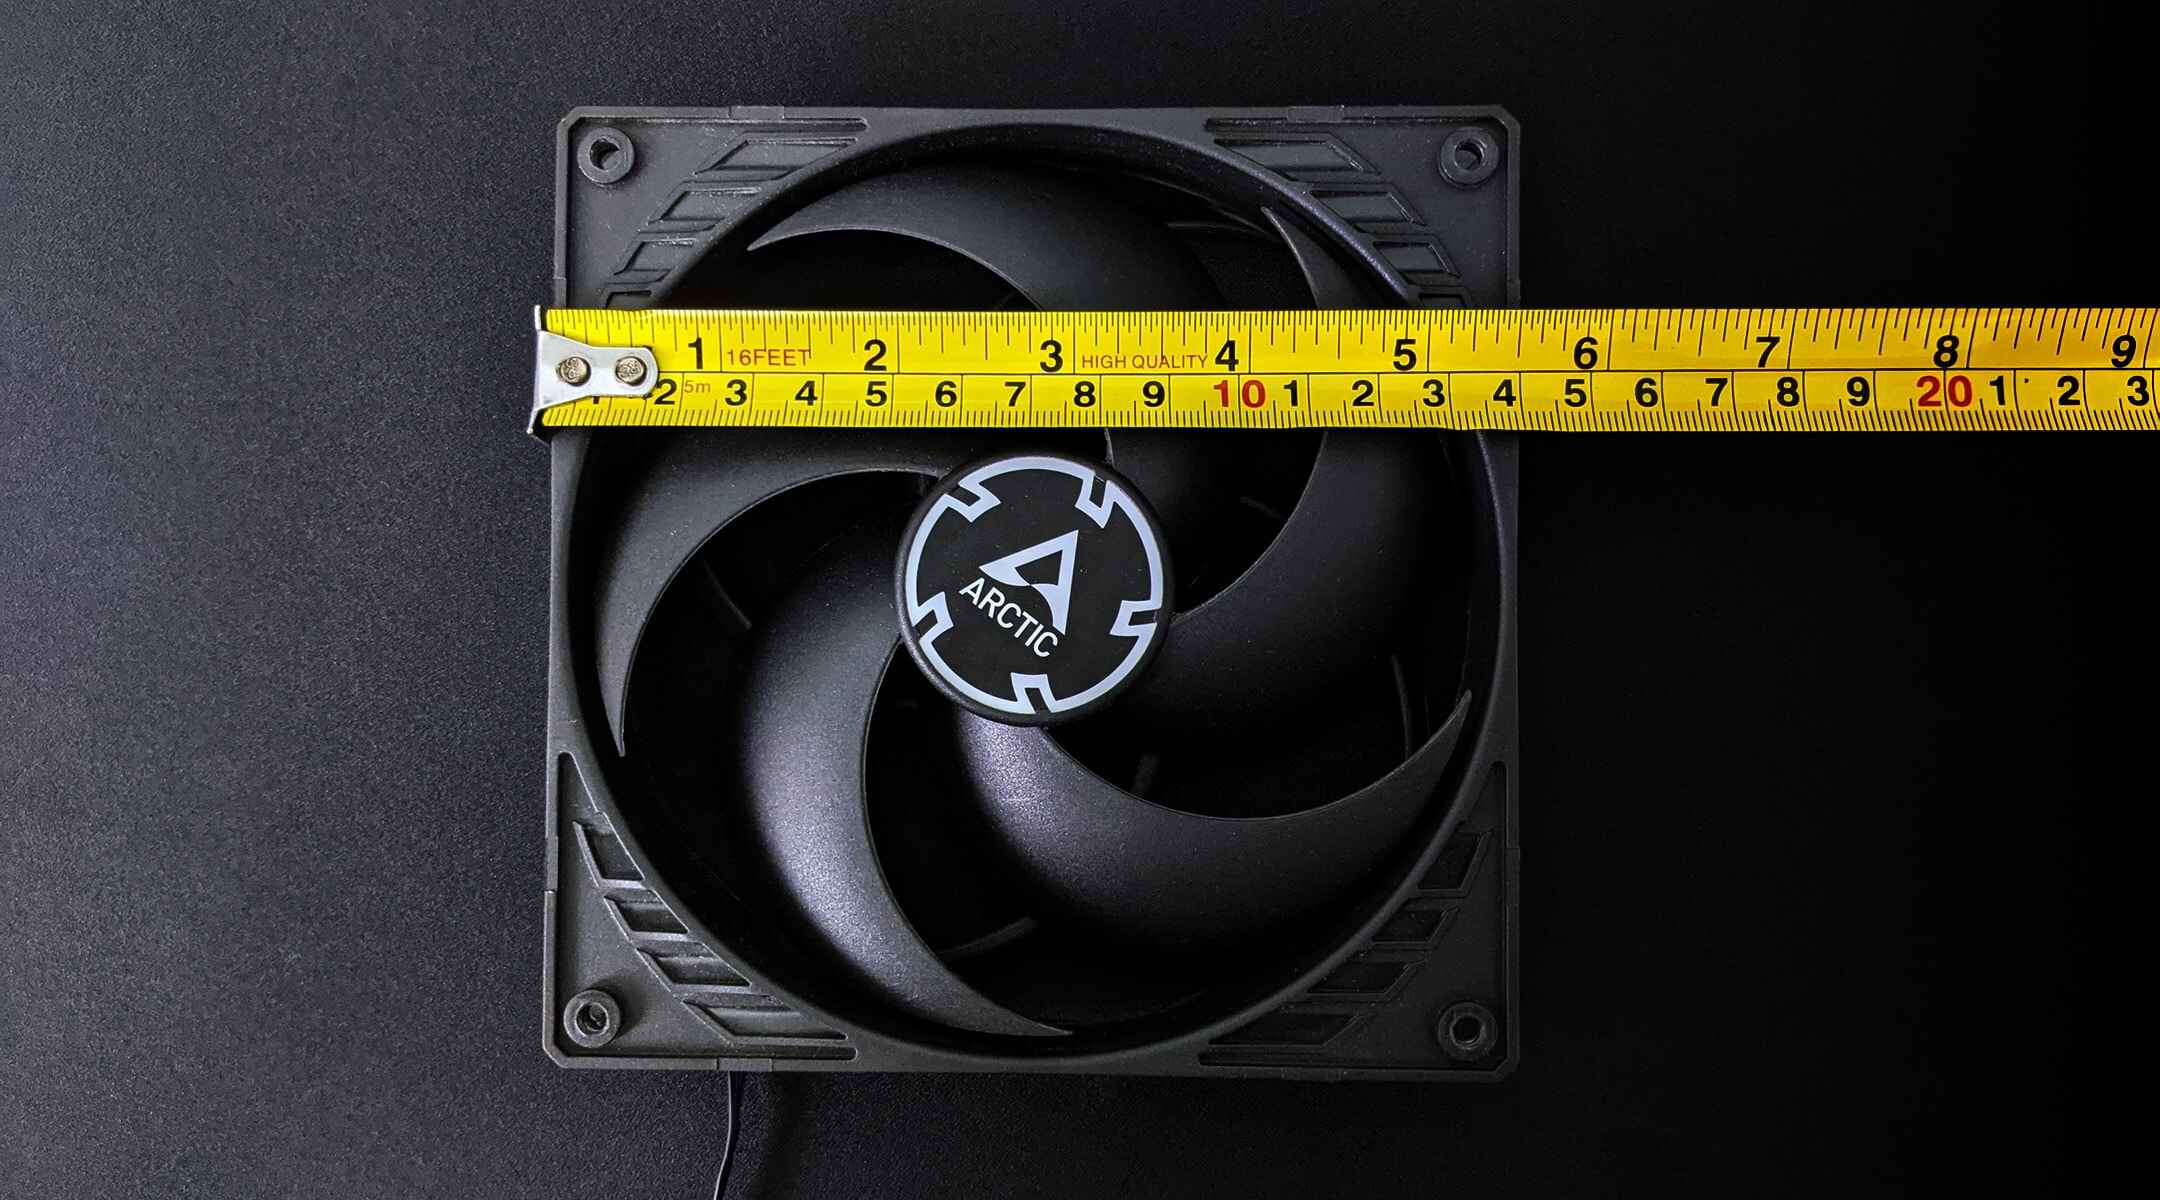 How To Measure For A PC Case Fan